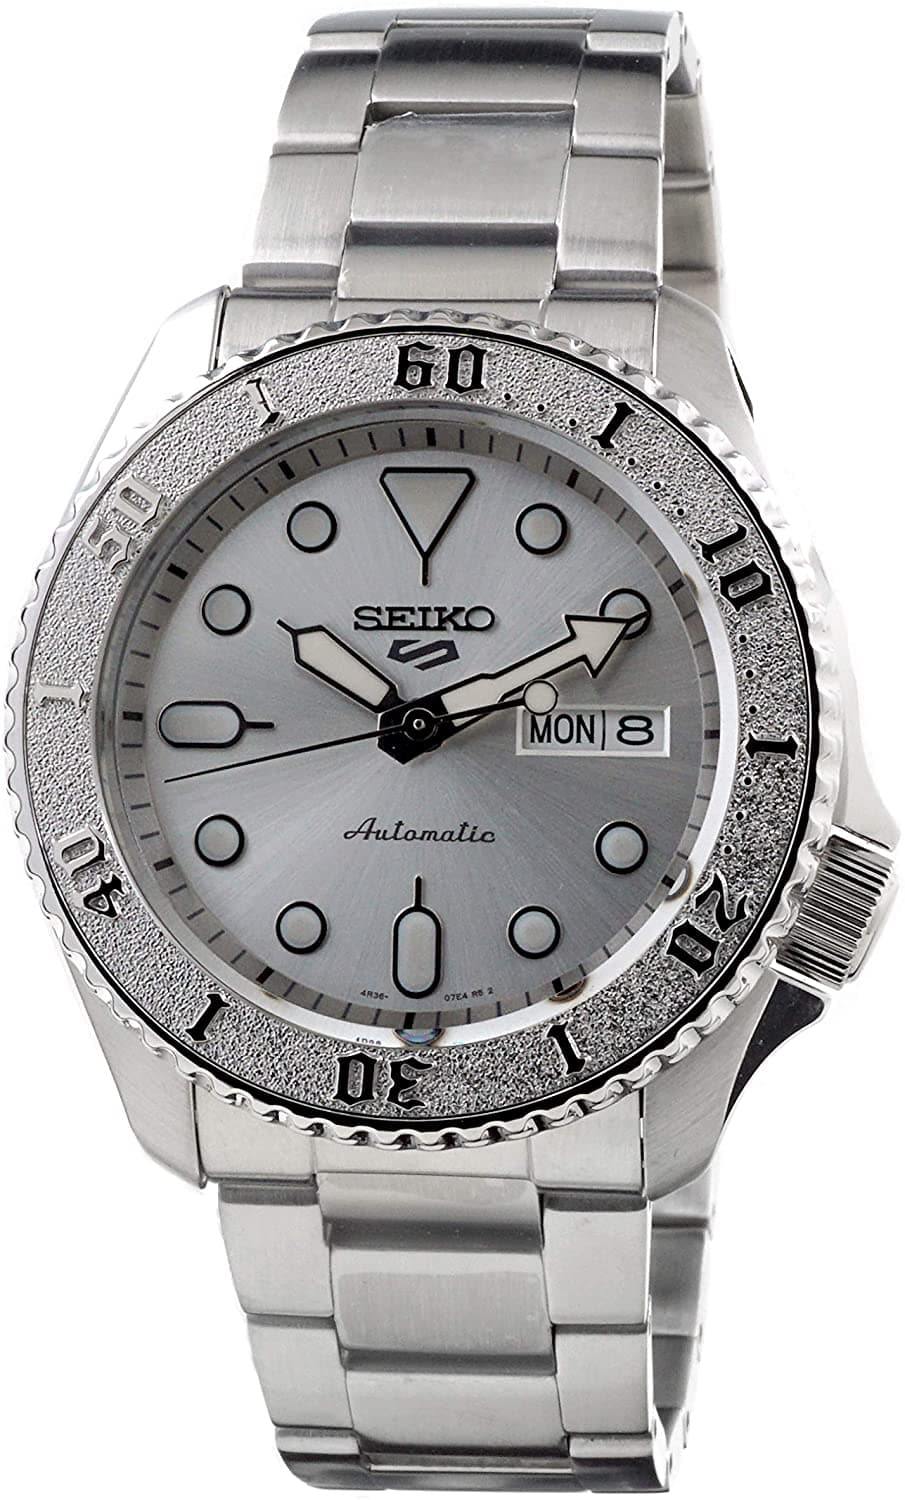 NEW Seiko 5 Sports 100M Automatic Men's Watch All Stainless Steel SRPE71K1 - Diligence1International